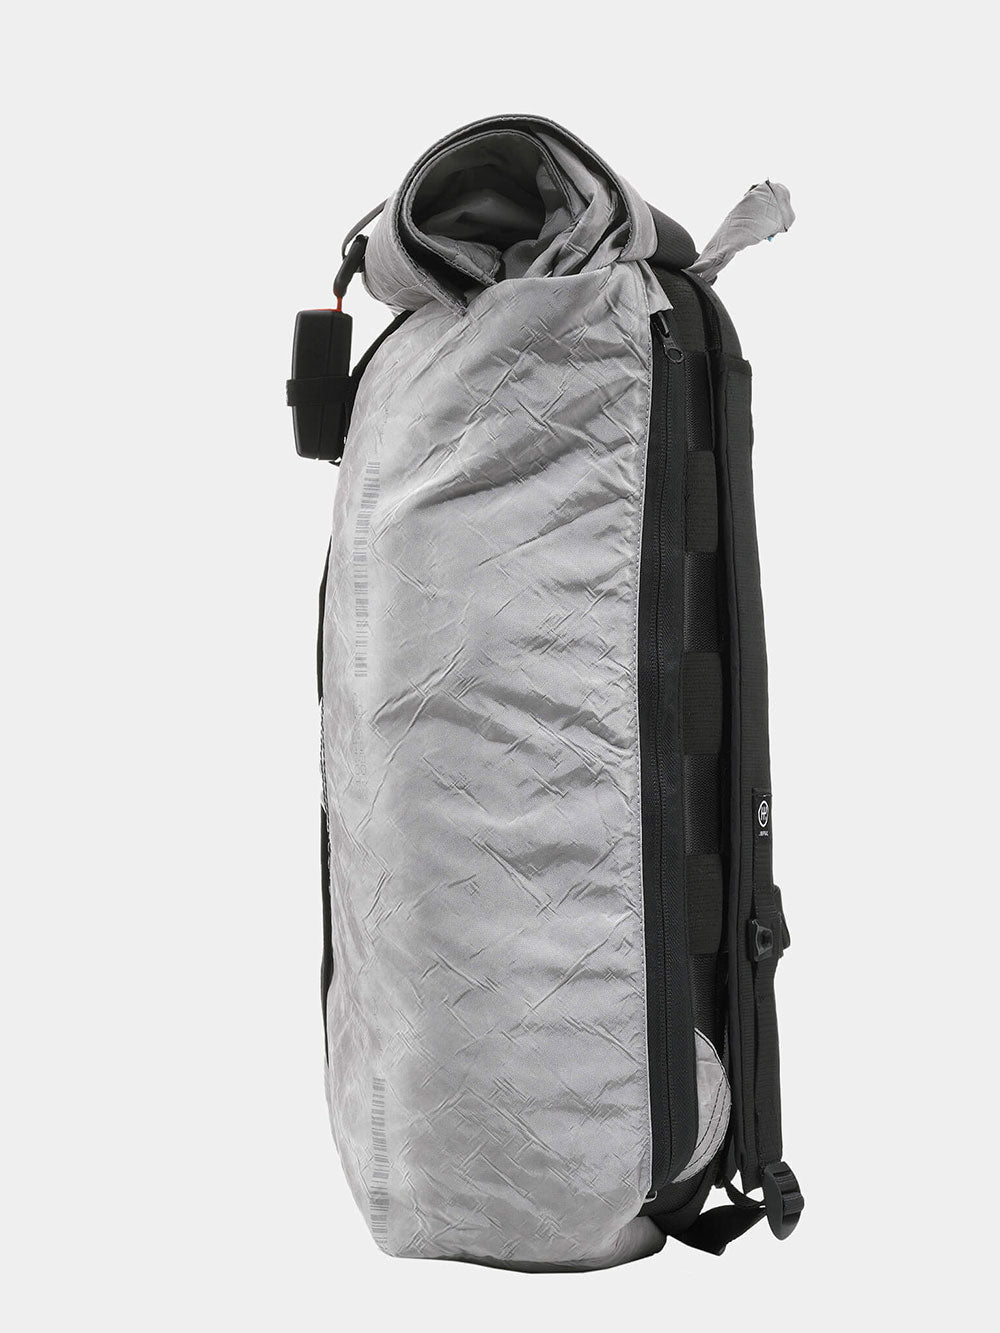 Airpaq Backpack Rolltop BIQ - gray colored 